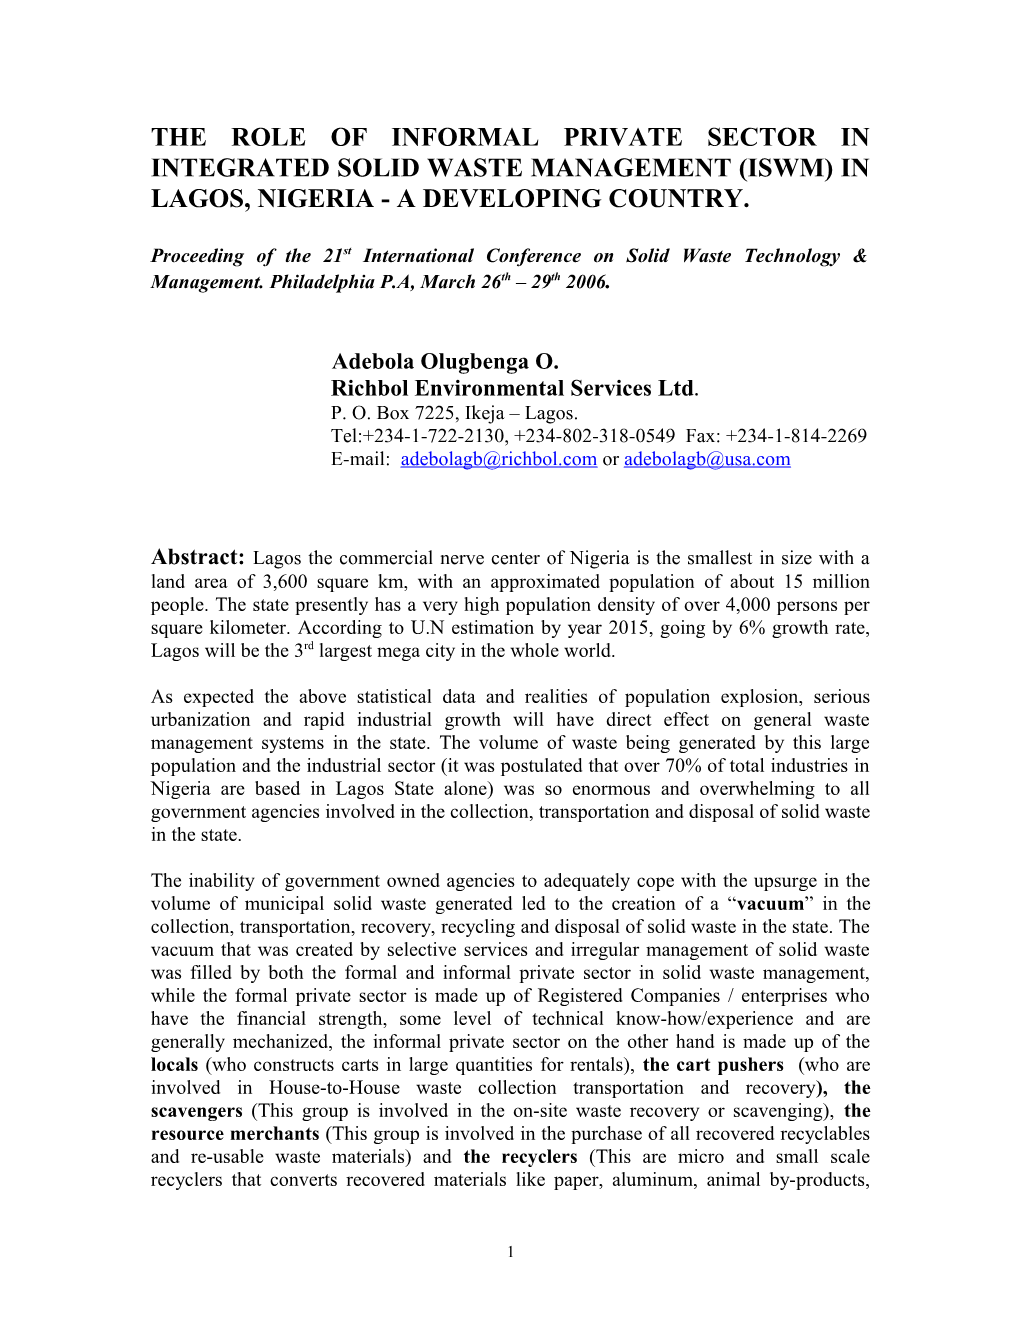 The Role of Informal Private Sector in Integrated Solid Waste Management (Iswm) in Lagos